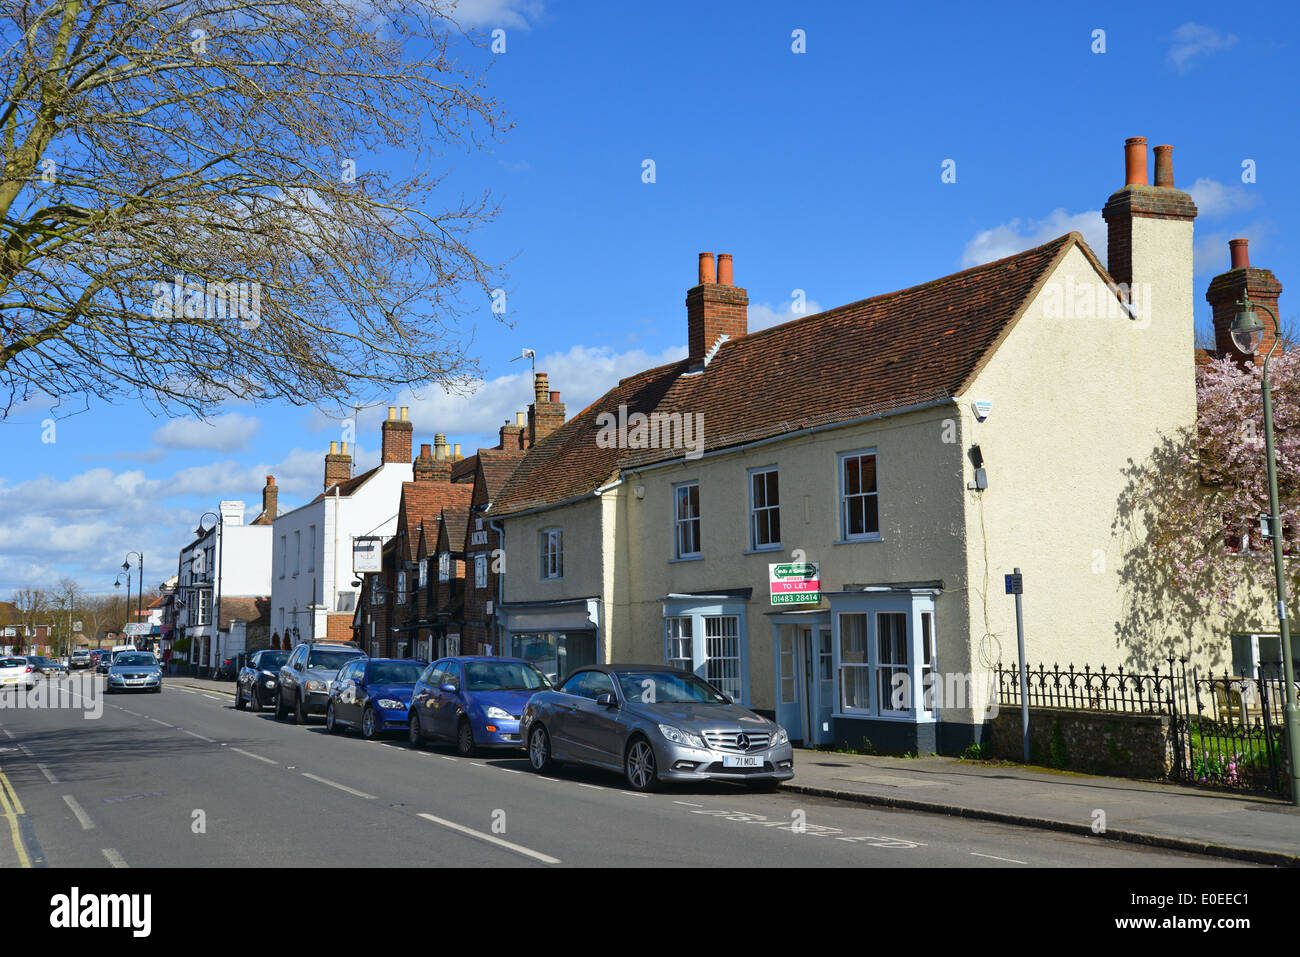 High Street, Ripley, Surrey, Angleterre, Royaume-Uni Banque D'Images